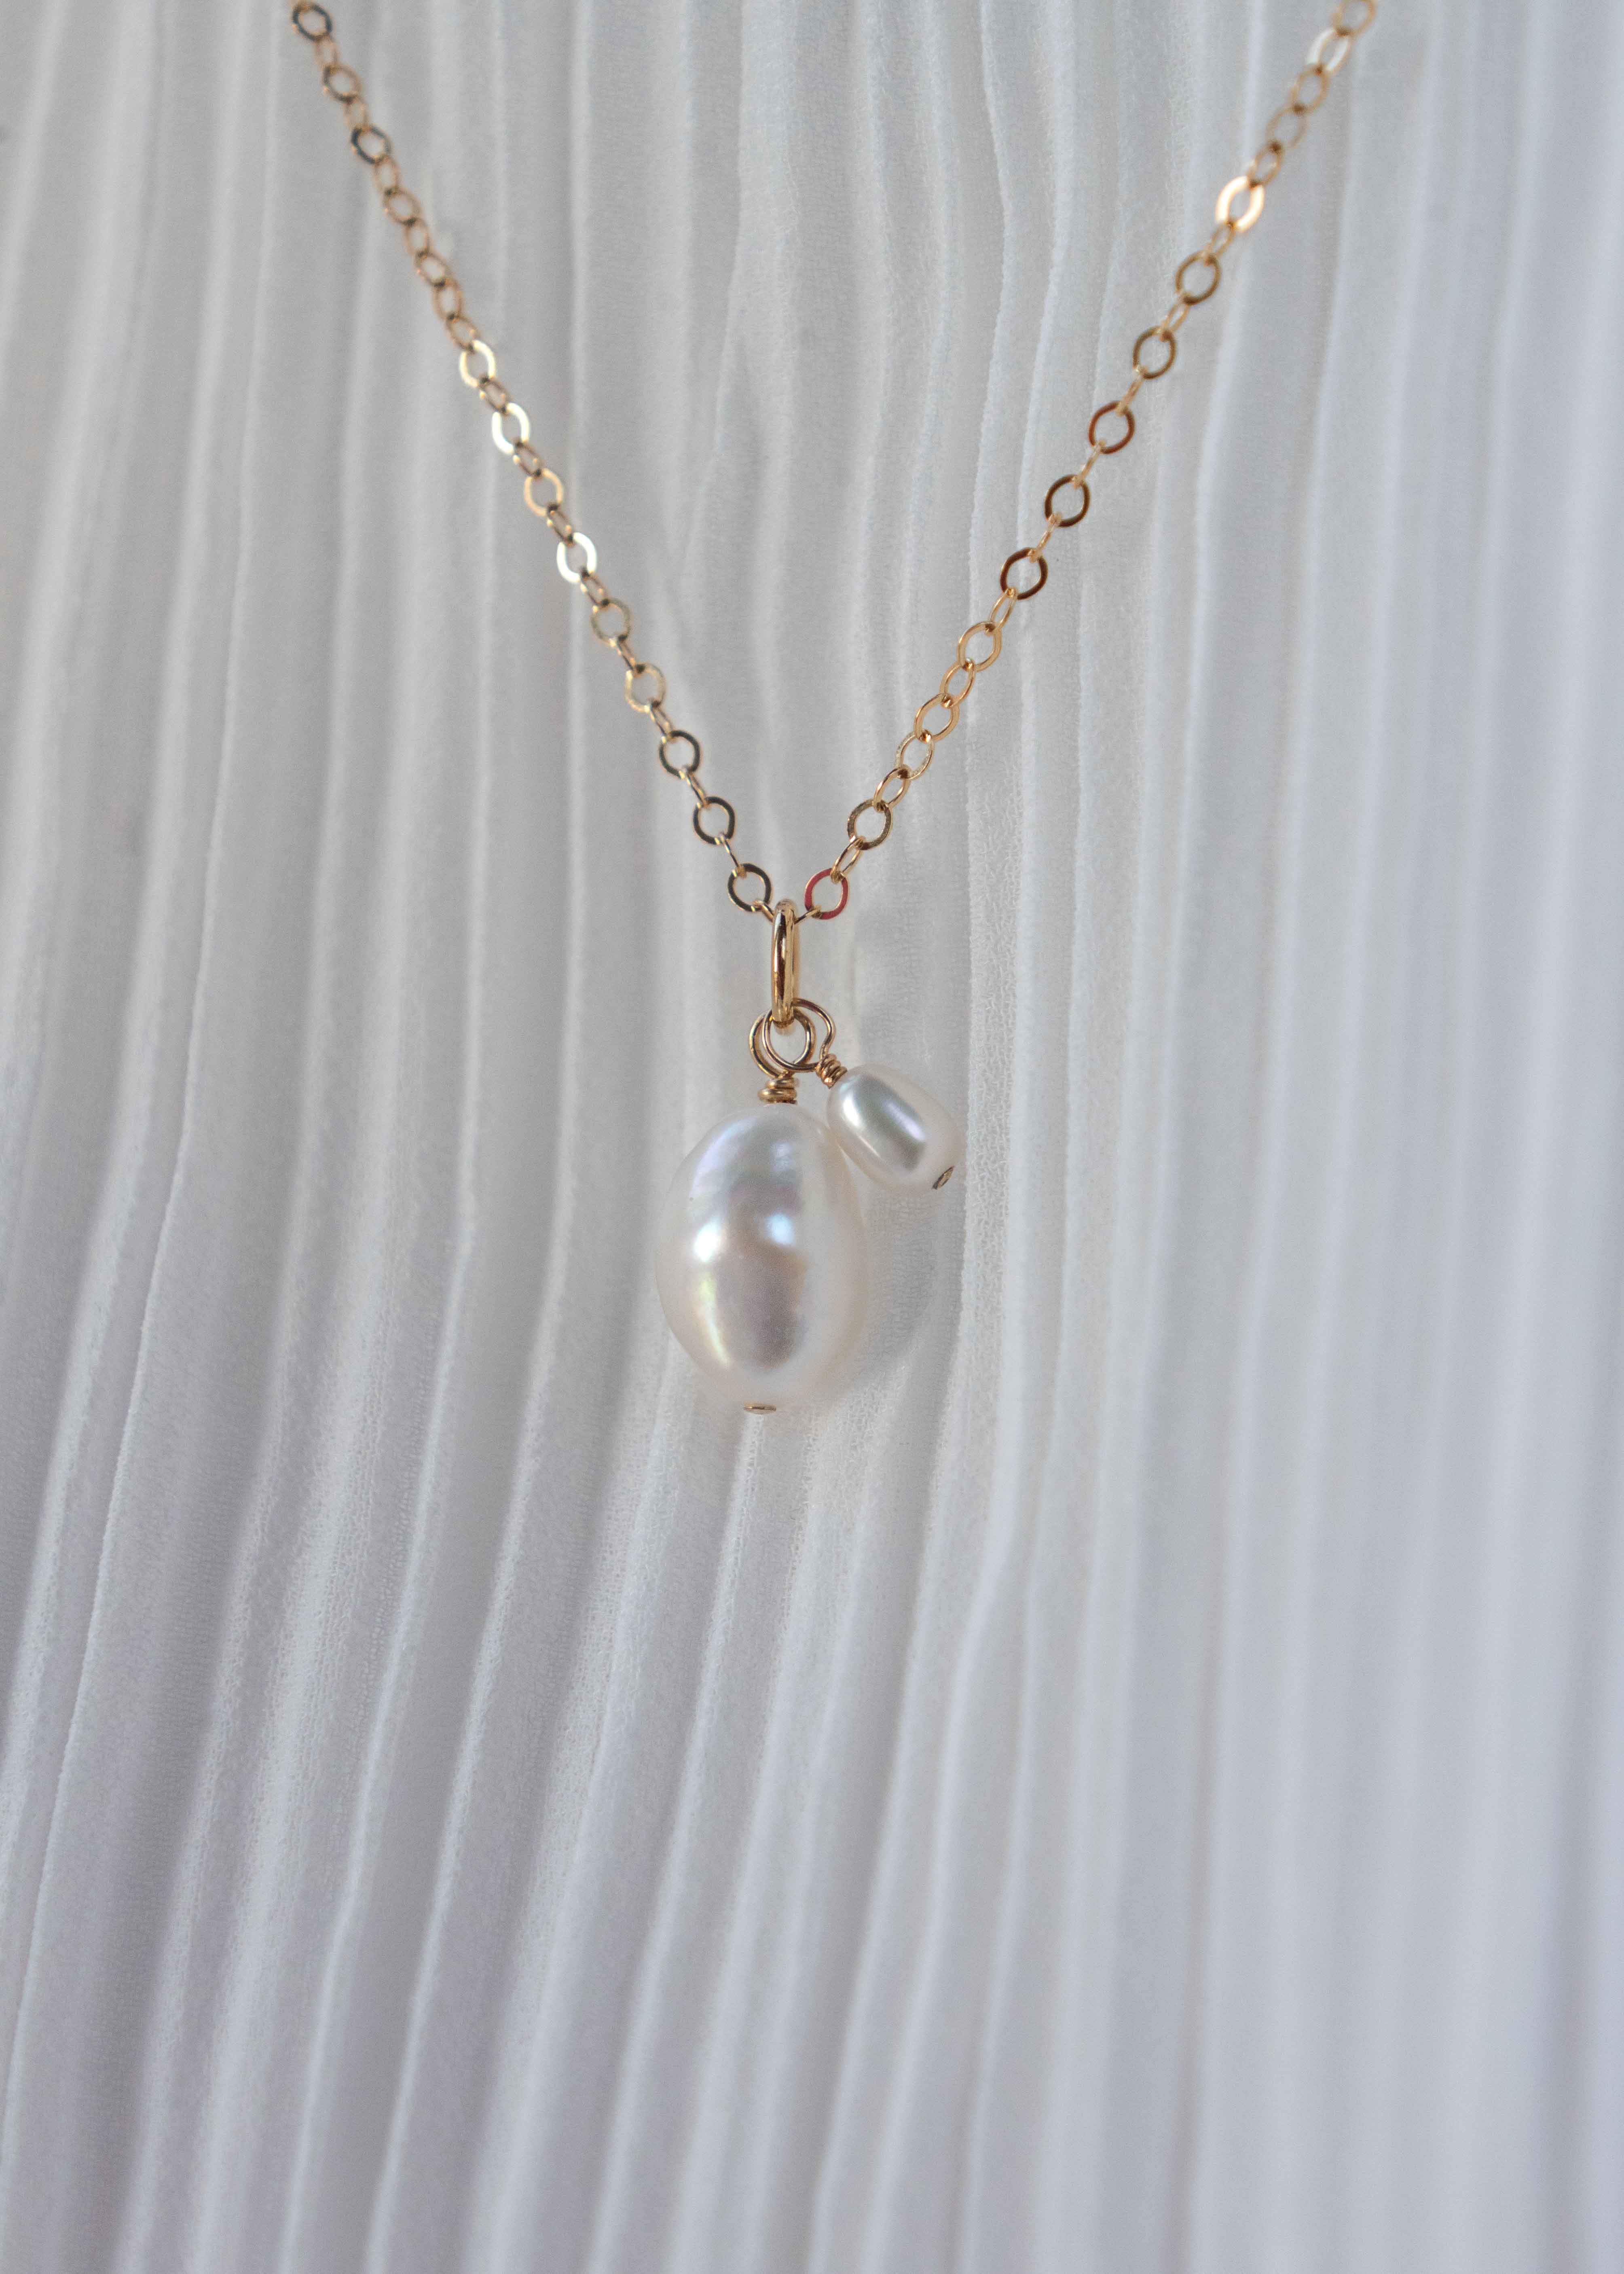 Mother Daughter Necklace, Mothers Day Gift, Gift for Mom, Gift for New Moms, Mom Gifts, Pearl Necklace